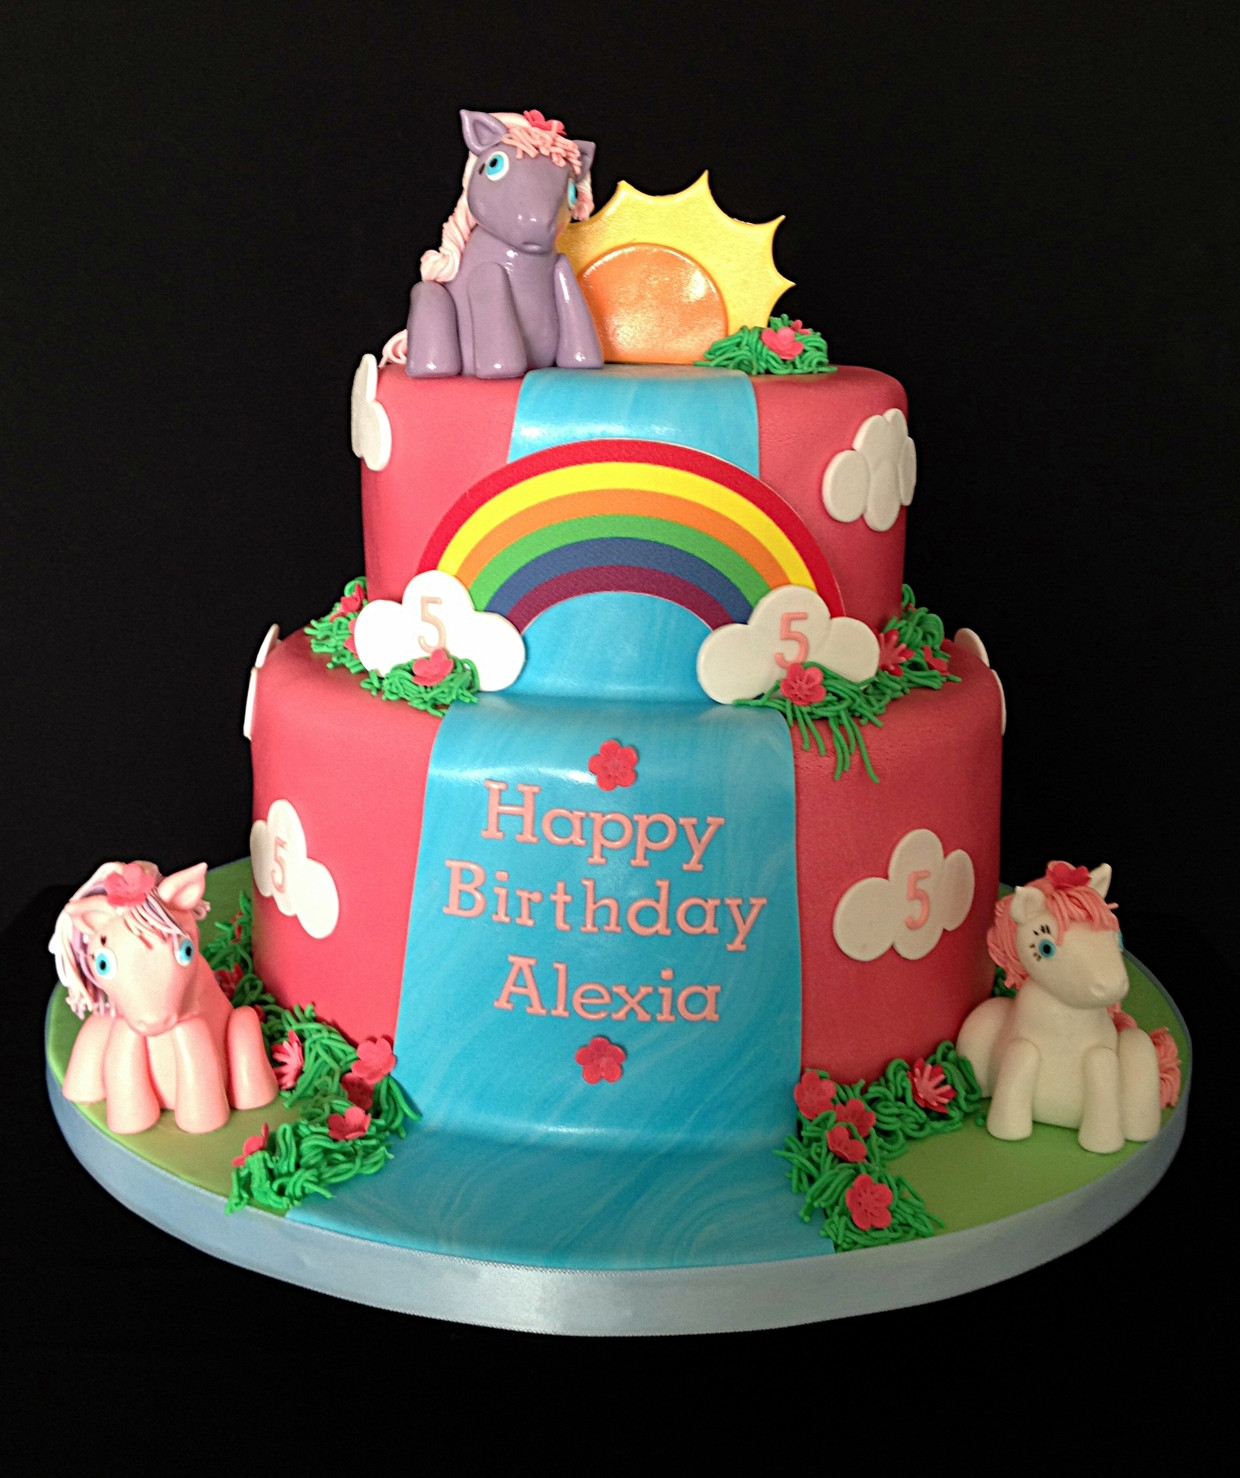 Custom Birthday Cakes Near Me
 Home Tips Kids Will Have A Fun With Walmart Cake Designs